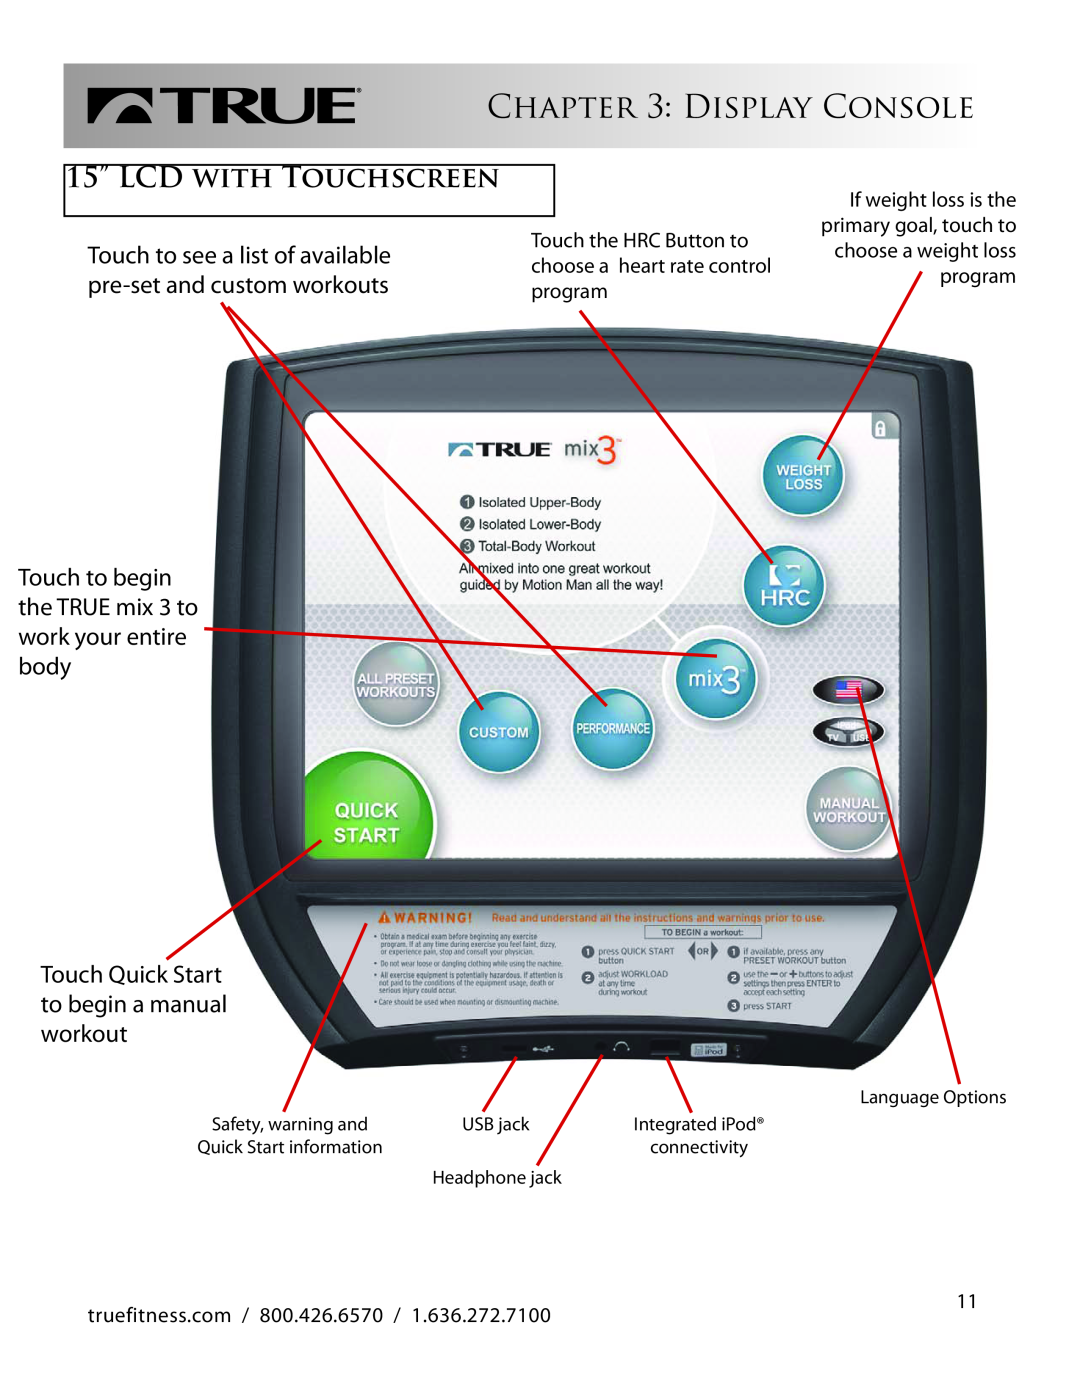 True Fitness CS800 manual 15” LCD WITH TOUCHSCREEN, Touch to begin the TRUE mix 3 to work your entire body, Display Console 